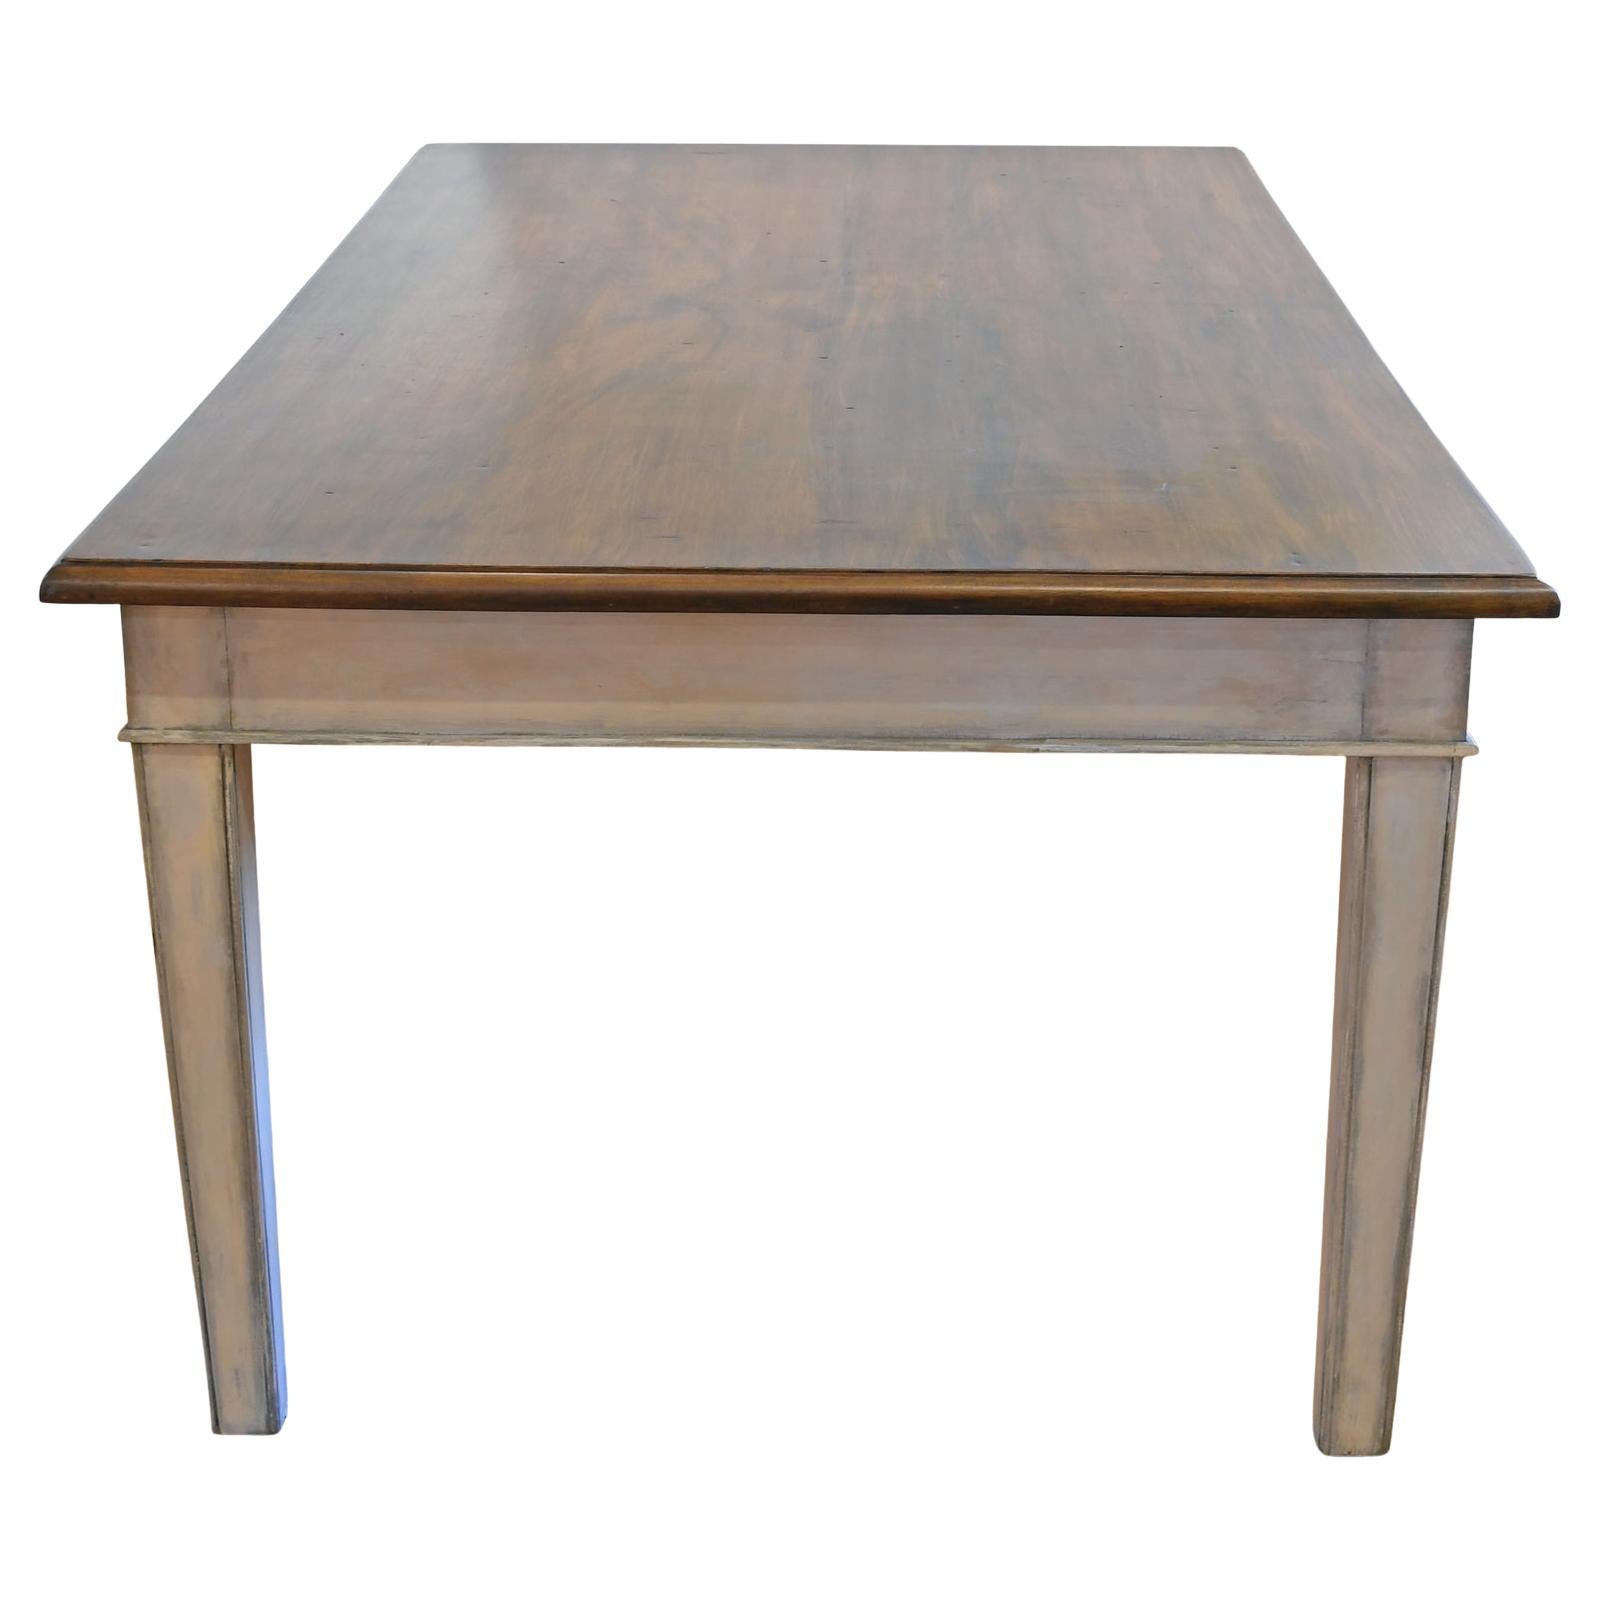 A rectangular dining table with hardwood top & square tappering legs. Base was newly painted in a grey-white Gustavian color with a faux bois tooled & grained top, made to look like walnut (dark umber). Table offers a total of 6 drawers; 3 on each